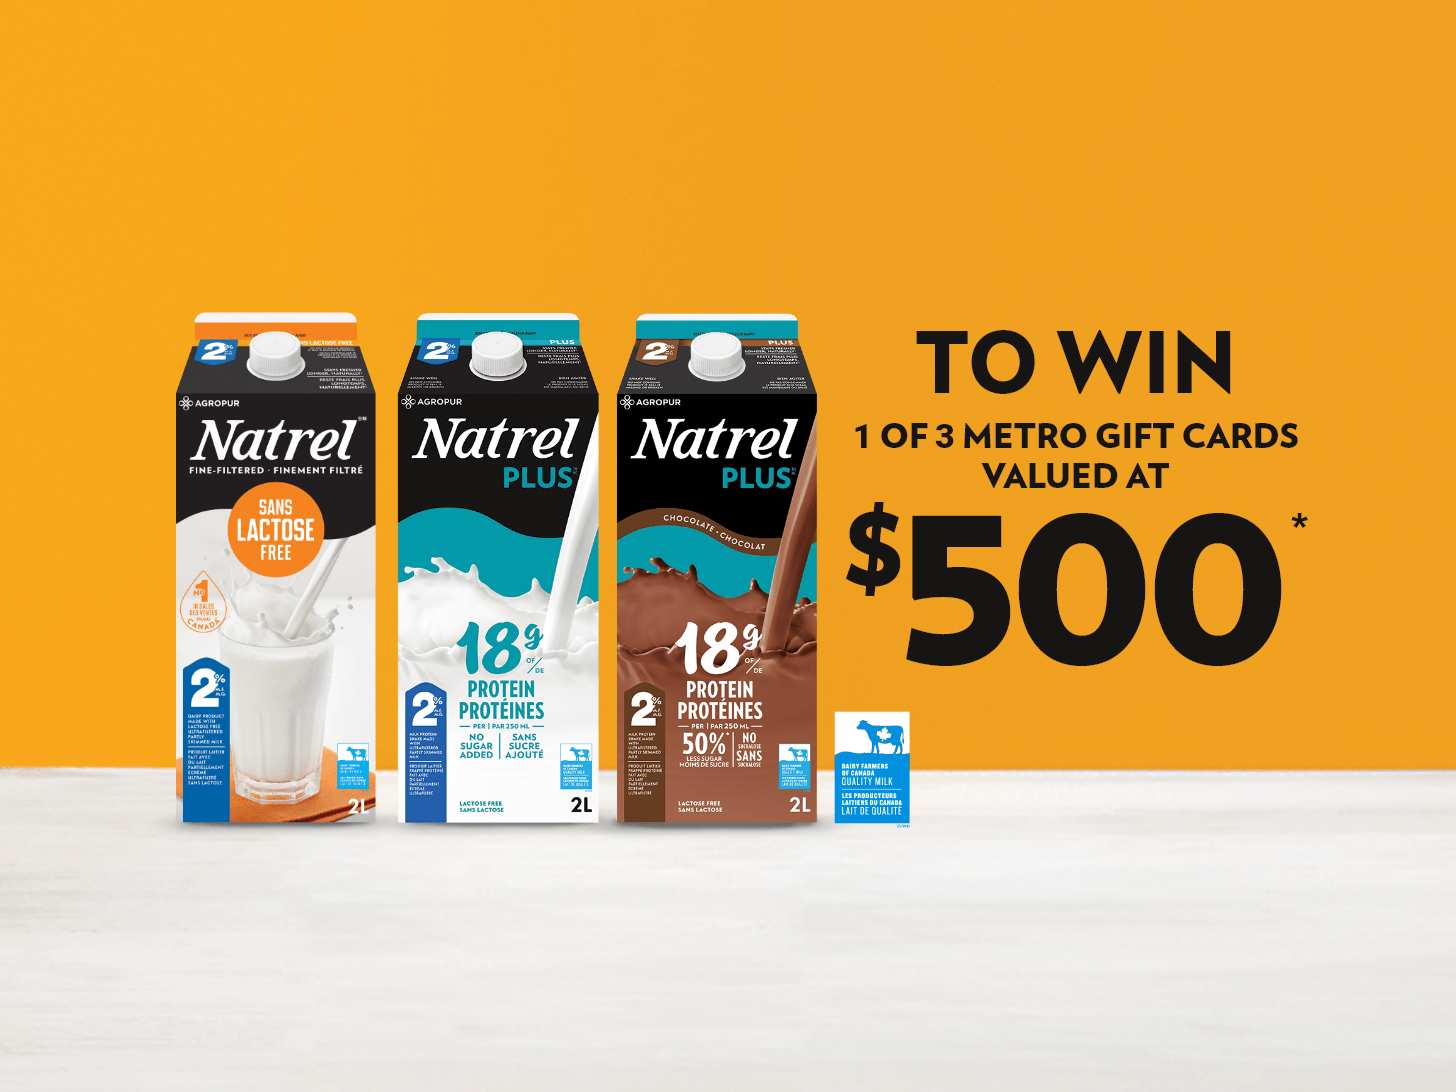 TO WIN 1 of 3 metro gift cards valued at $500*